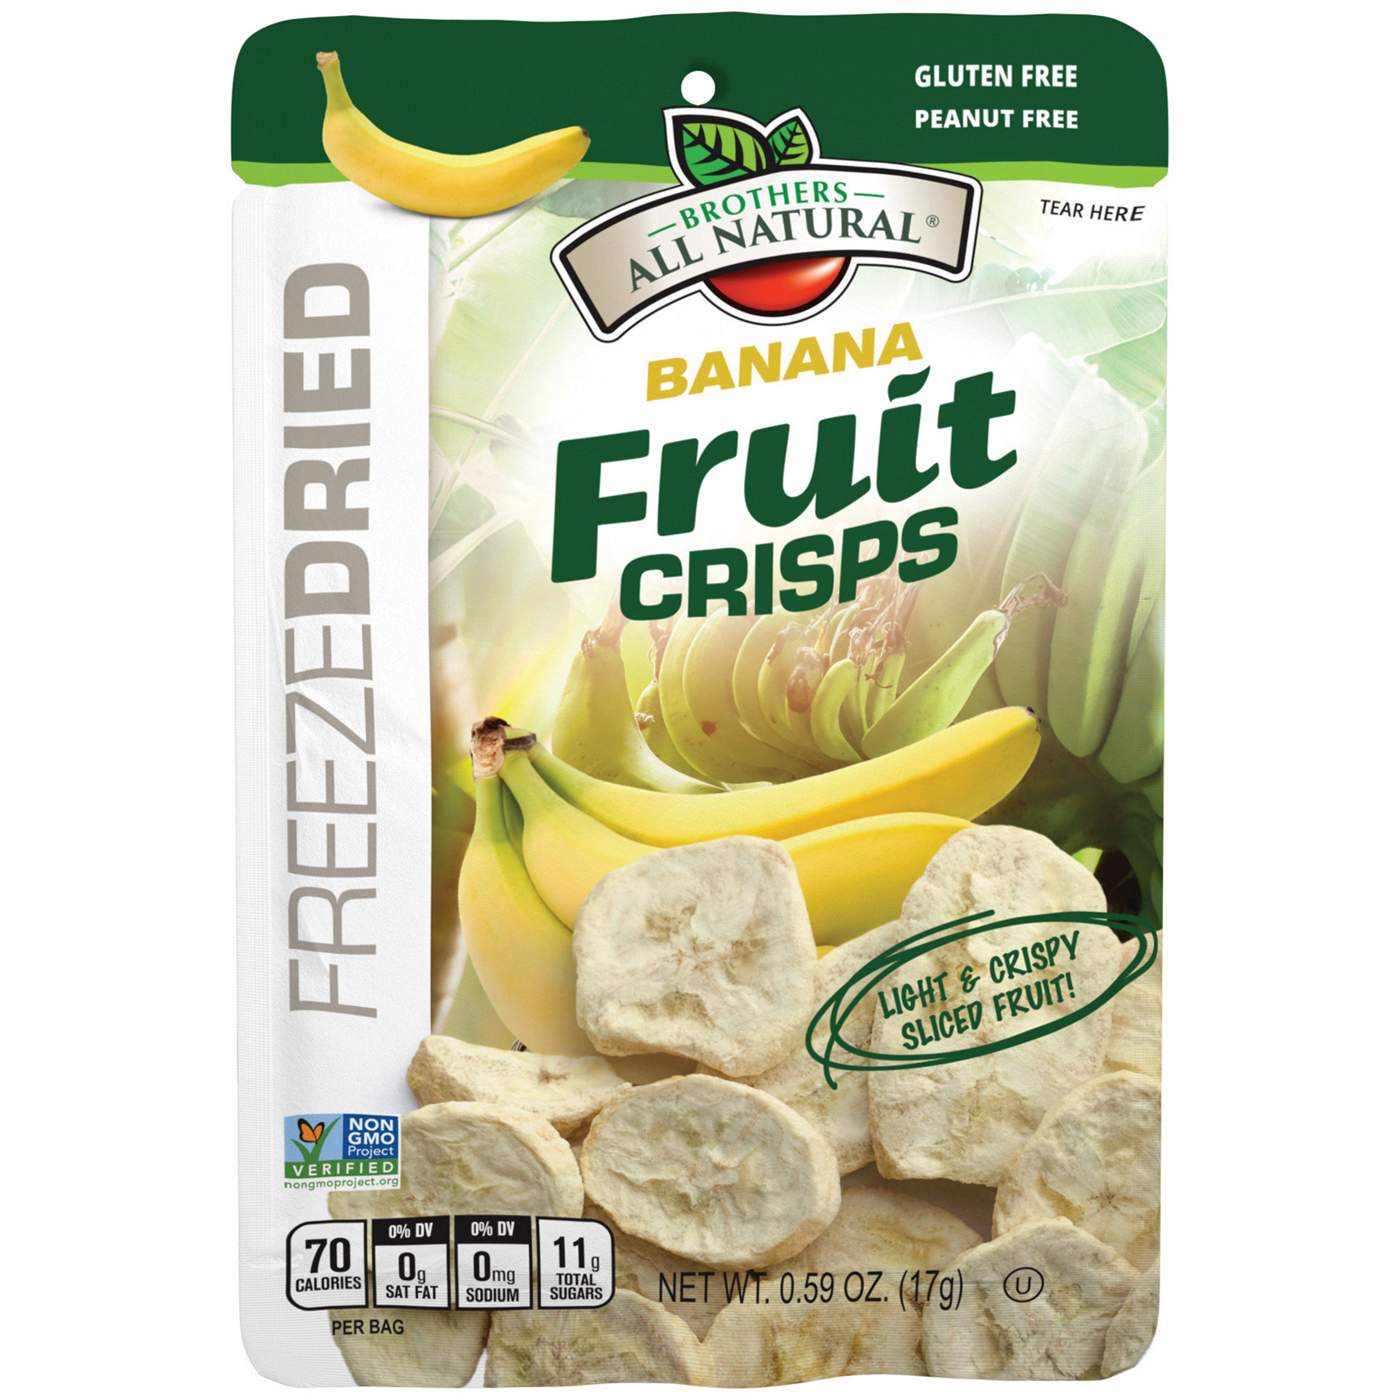 Brothers All Natural Banana Freeze-Dried Fruit Crisps; image 1 of 3